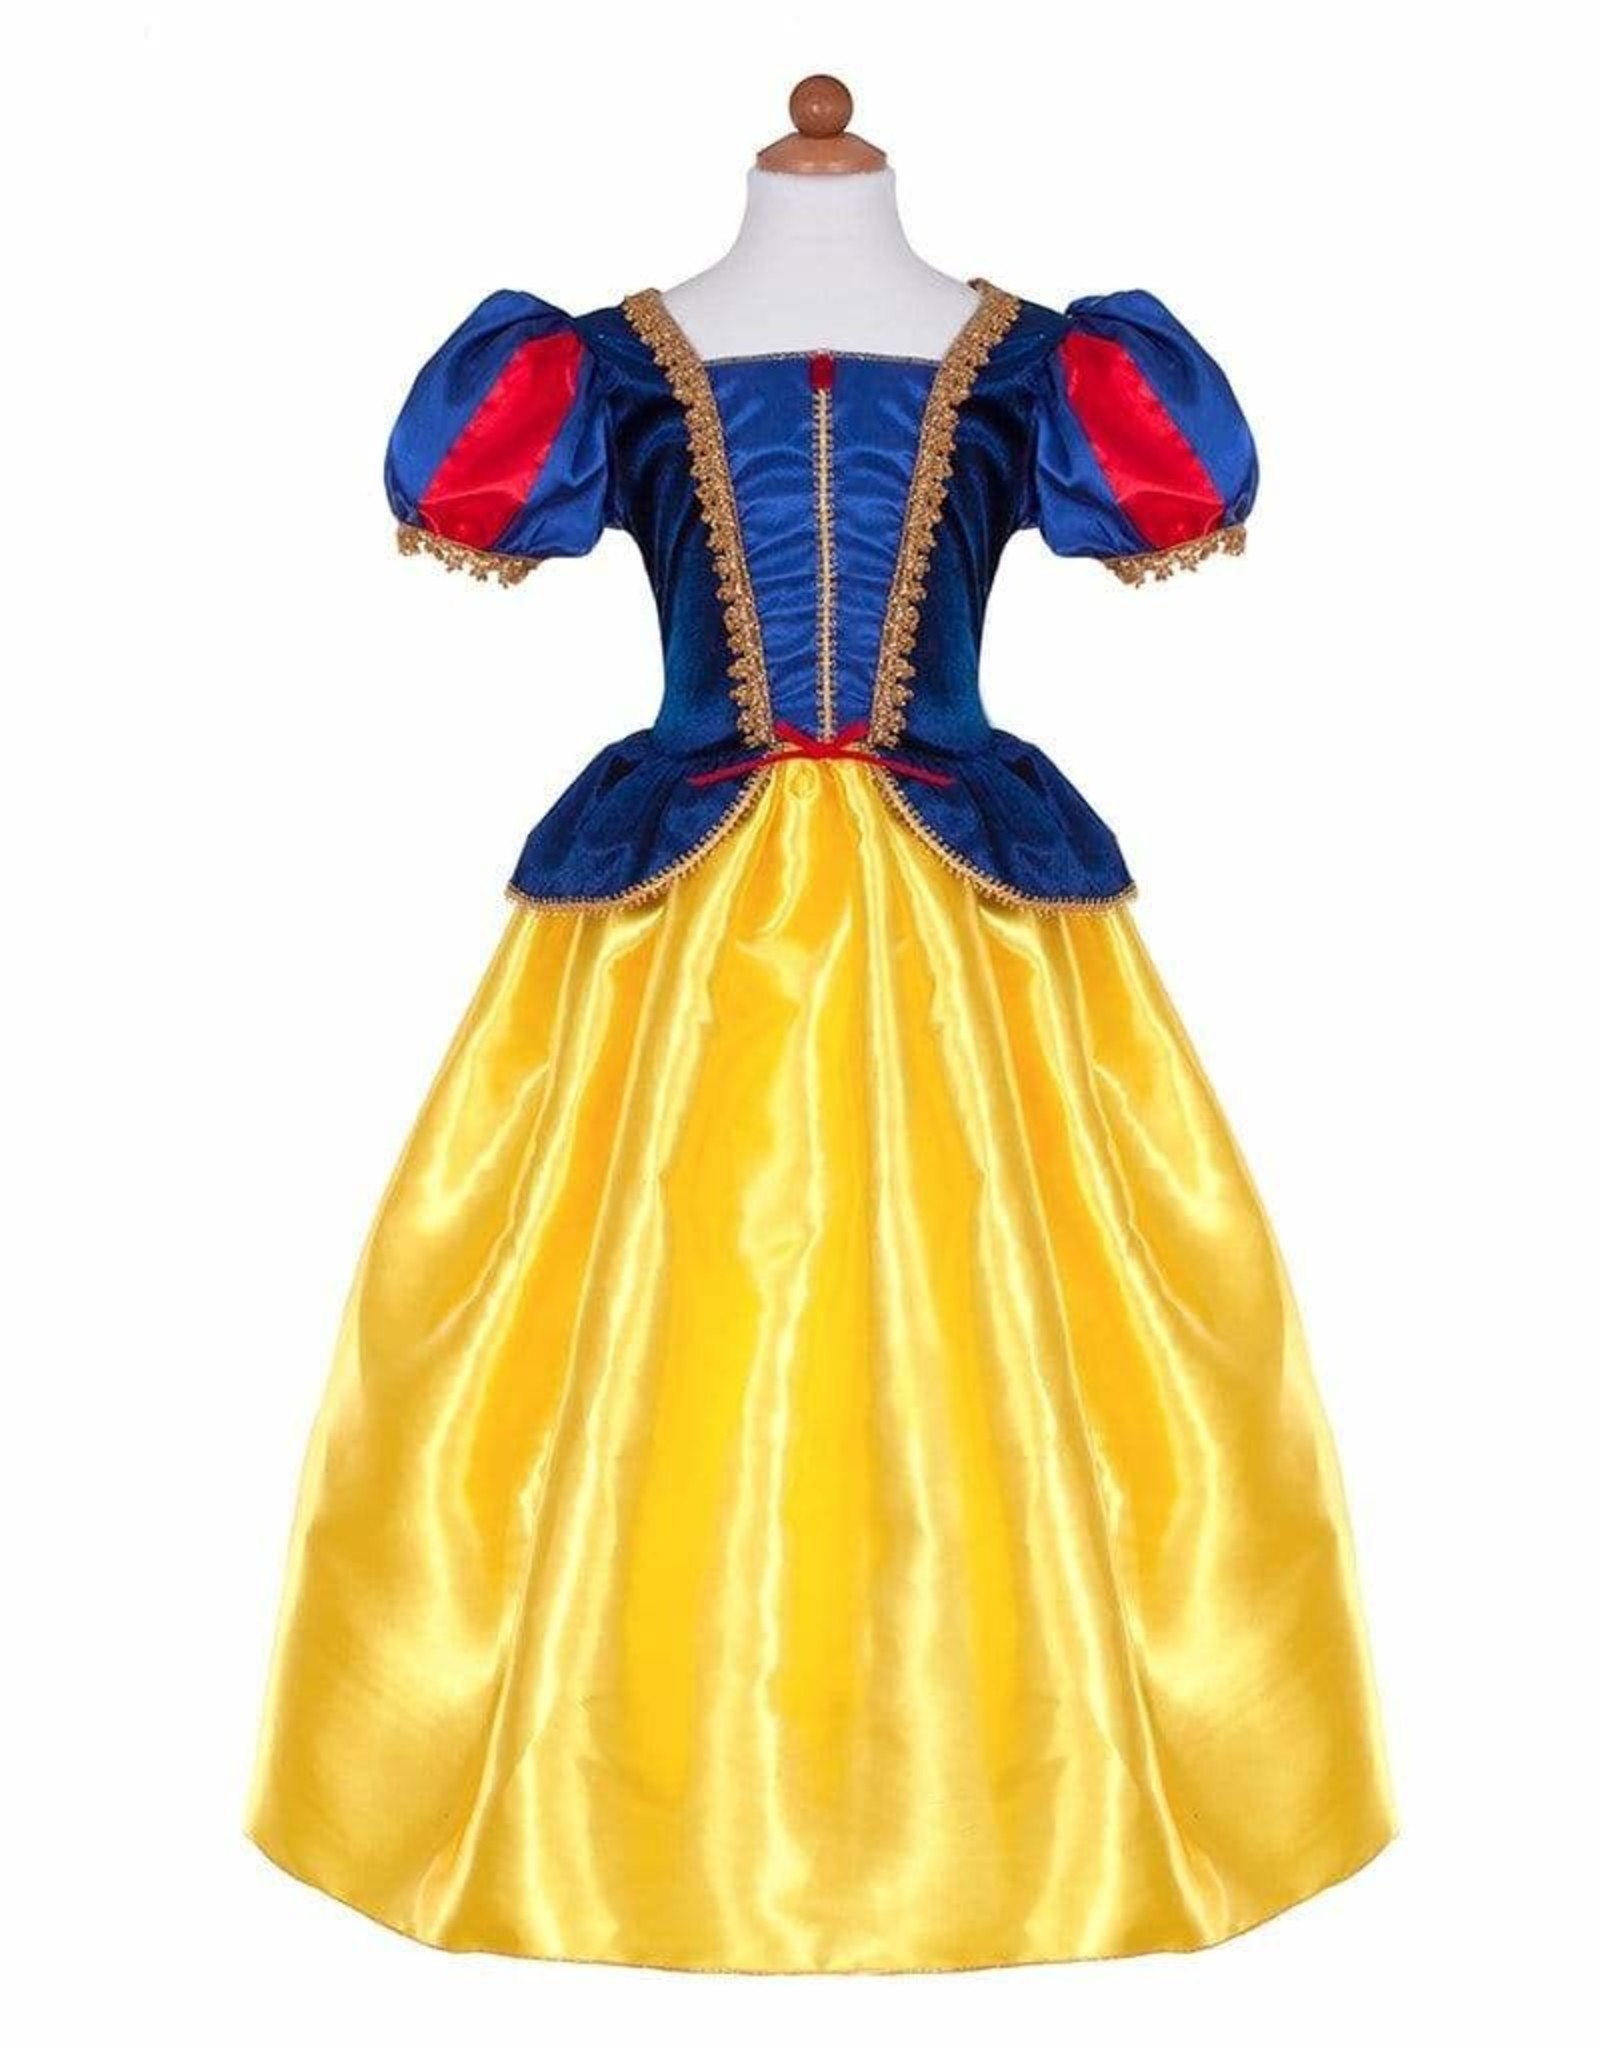 Great Pretenders Deluxe Snow White Gown, Size 5-6